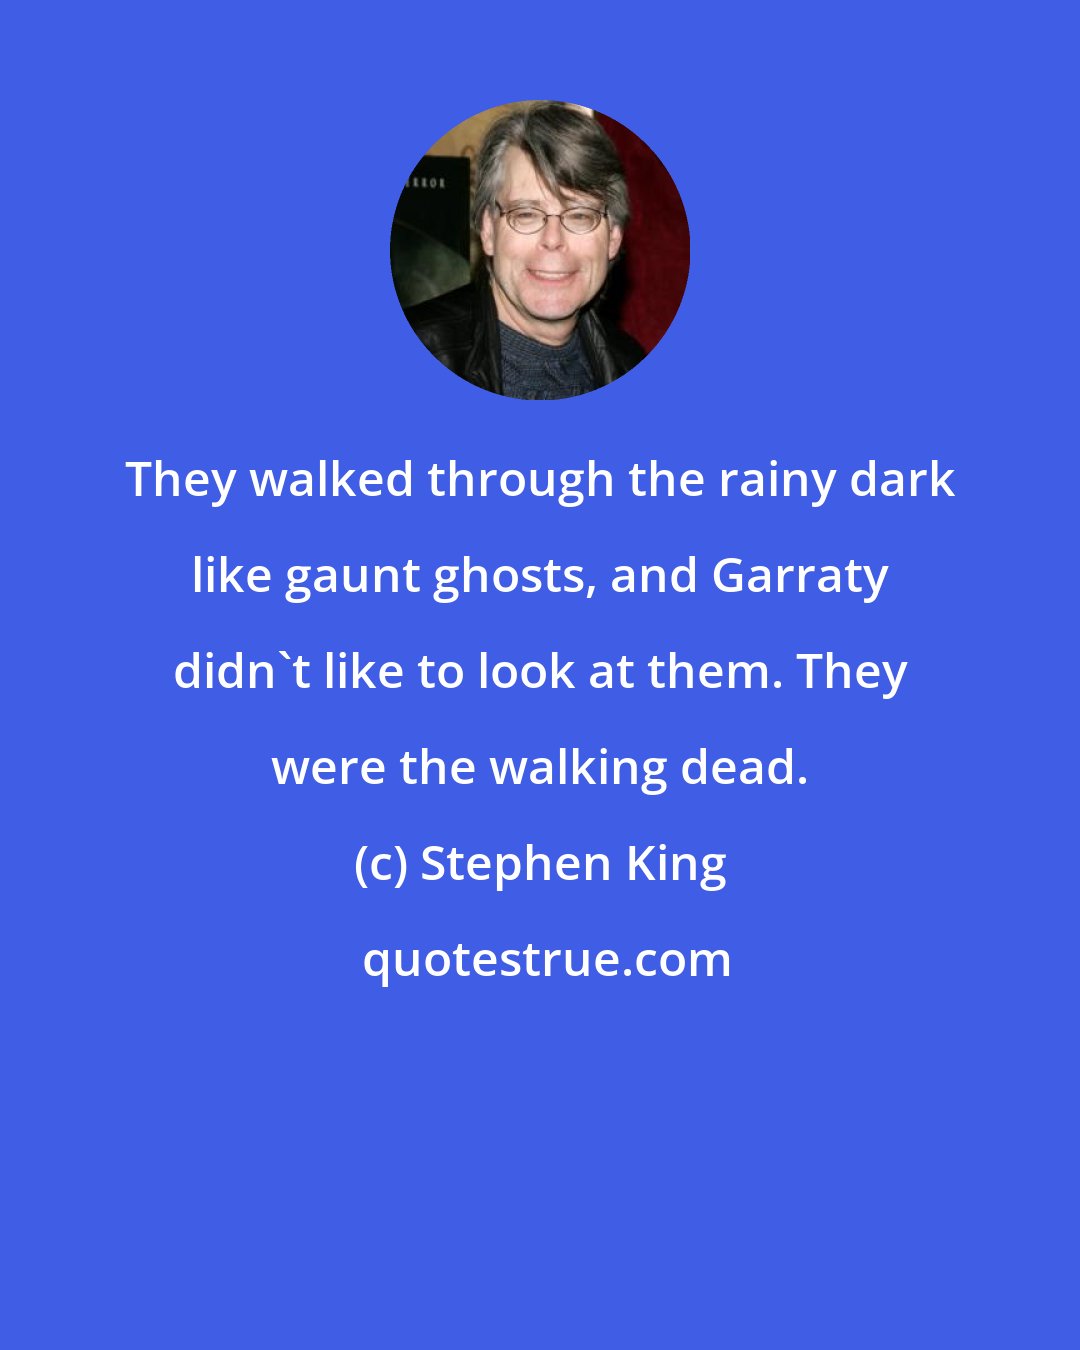 Stephen King: They walked through the rainy dark like gaunt ghosts, and Garraty didn't like to look at them. They were the walking dead.